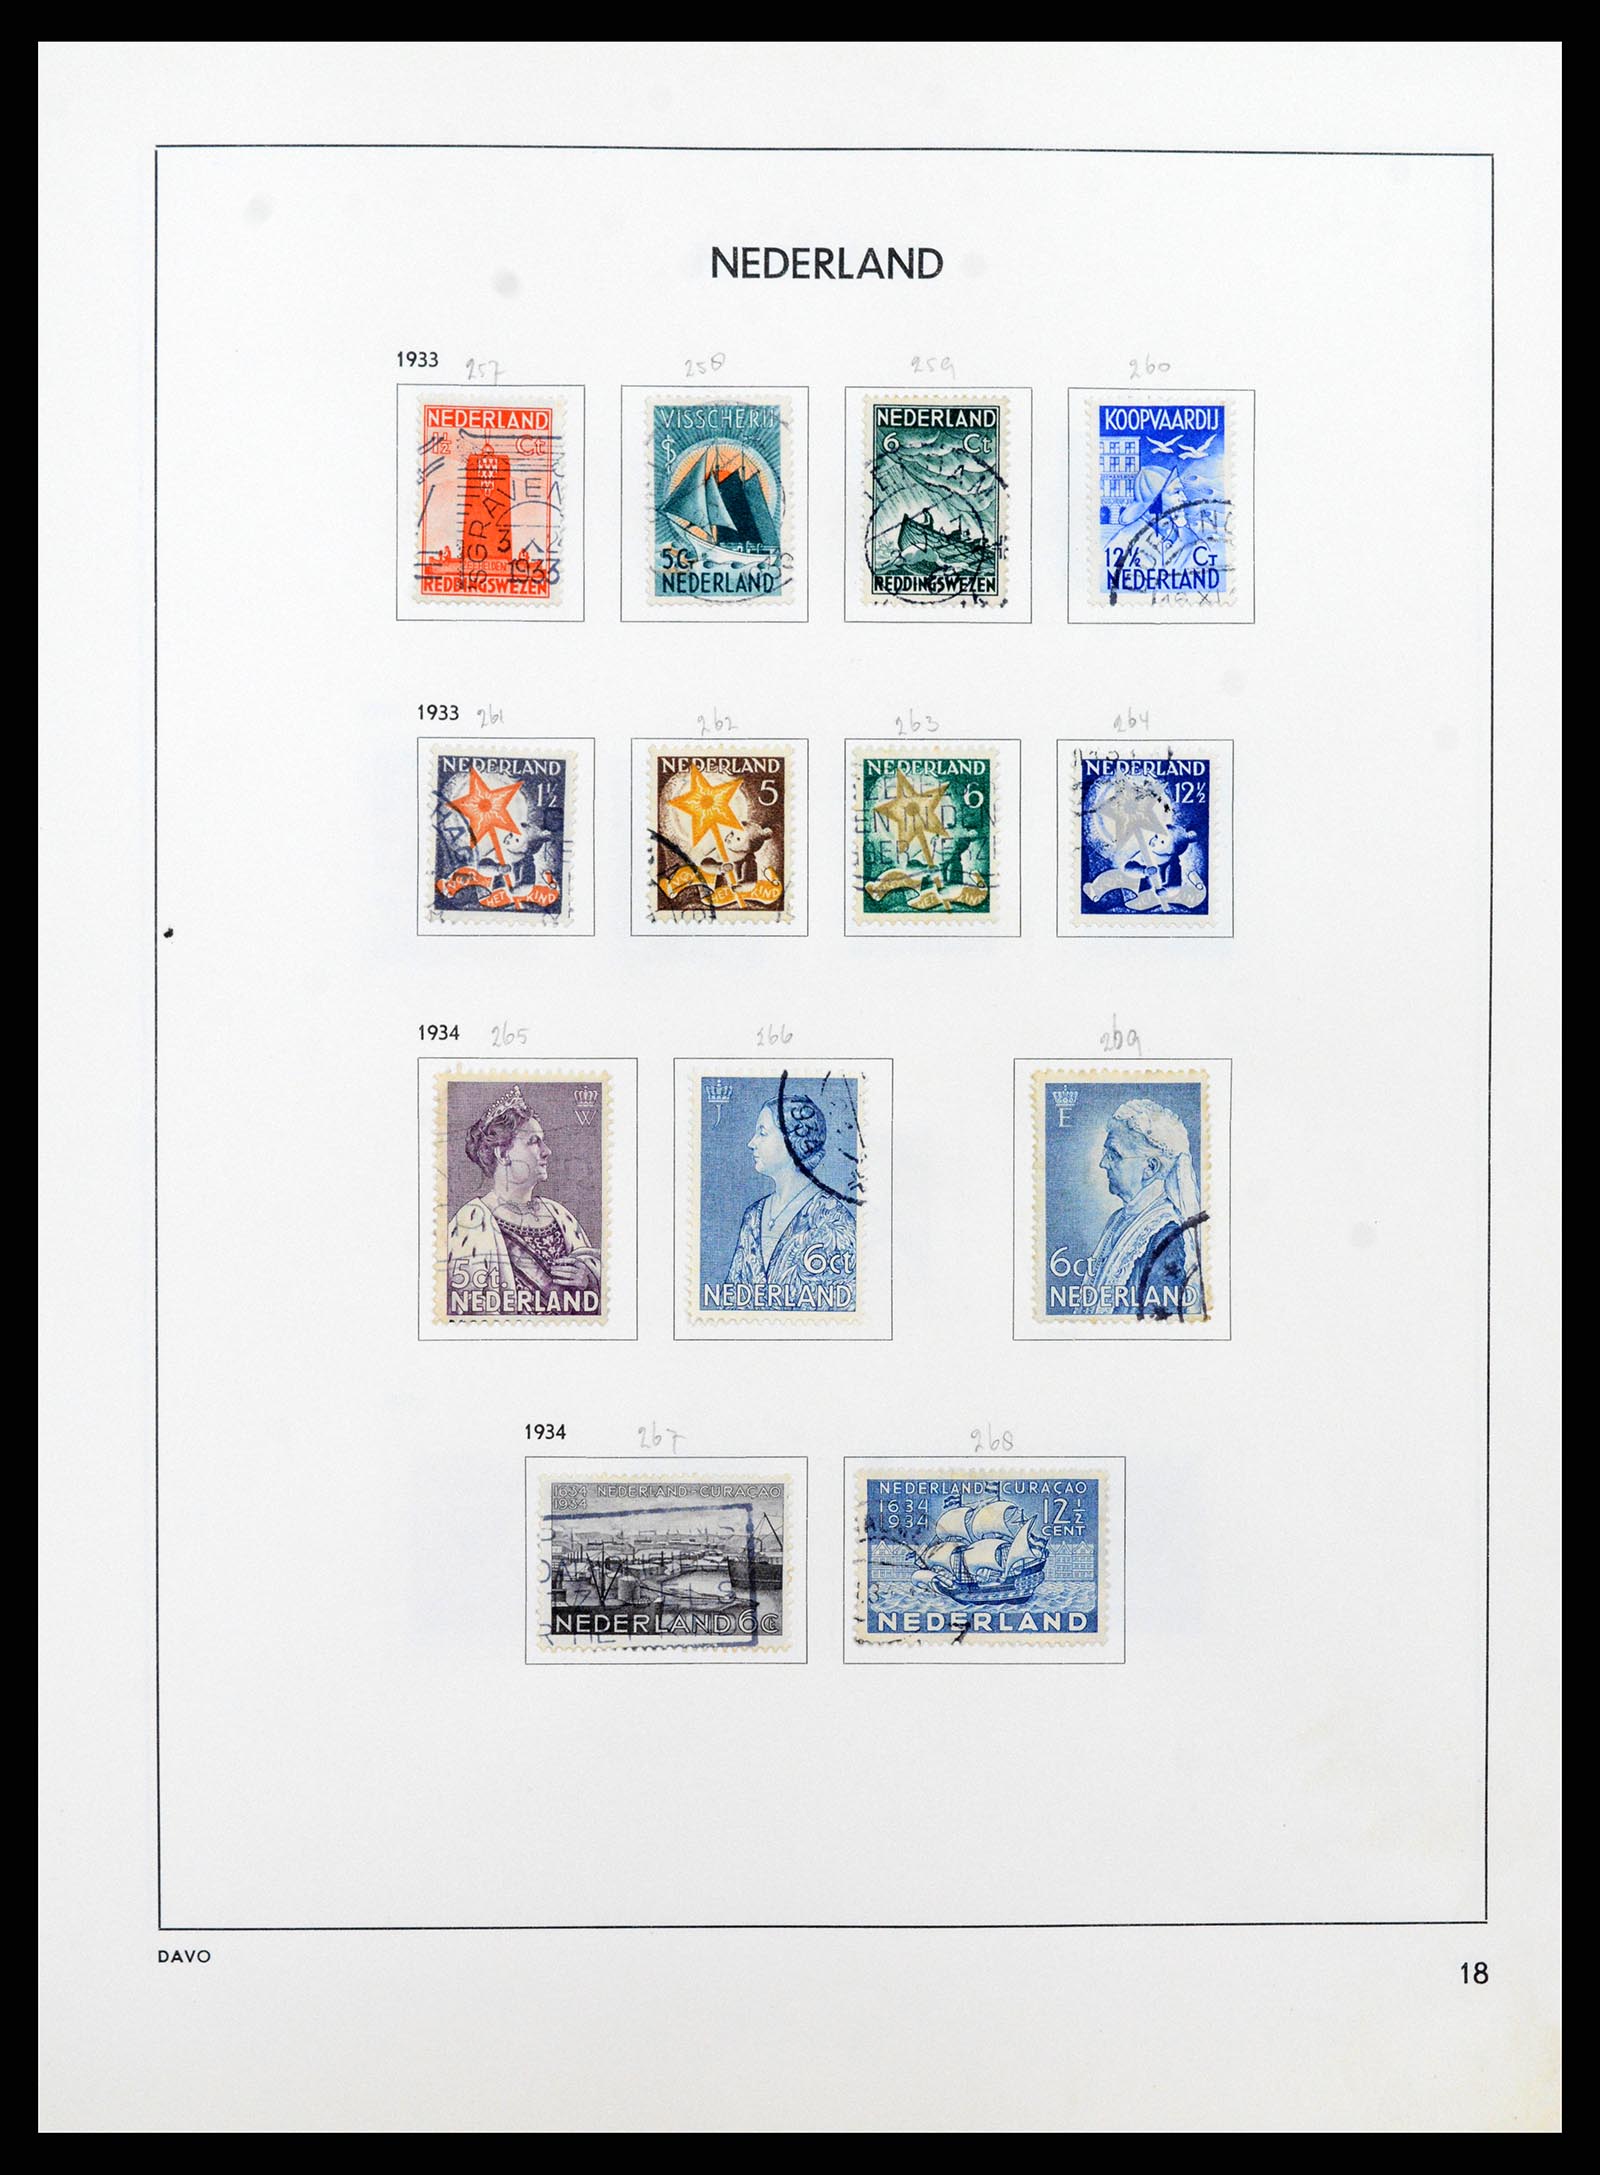 37346 018 - Stamp collection 37346 Netherlands 1852-1996.